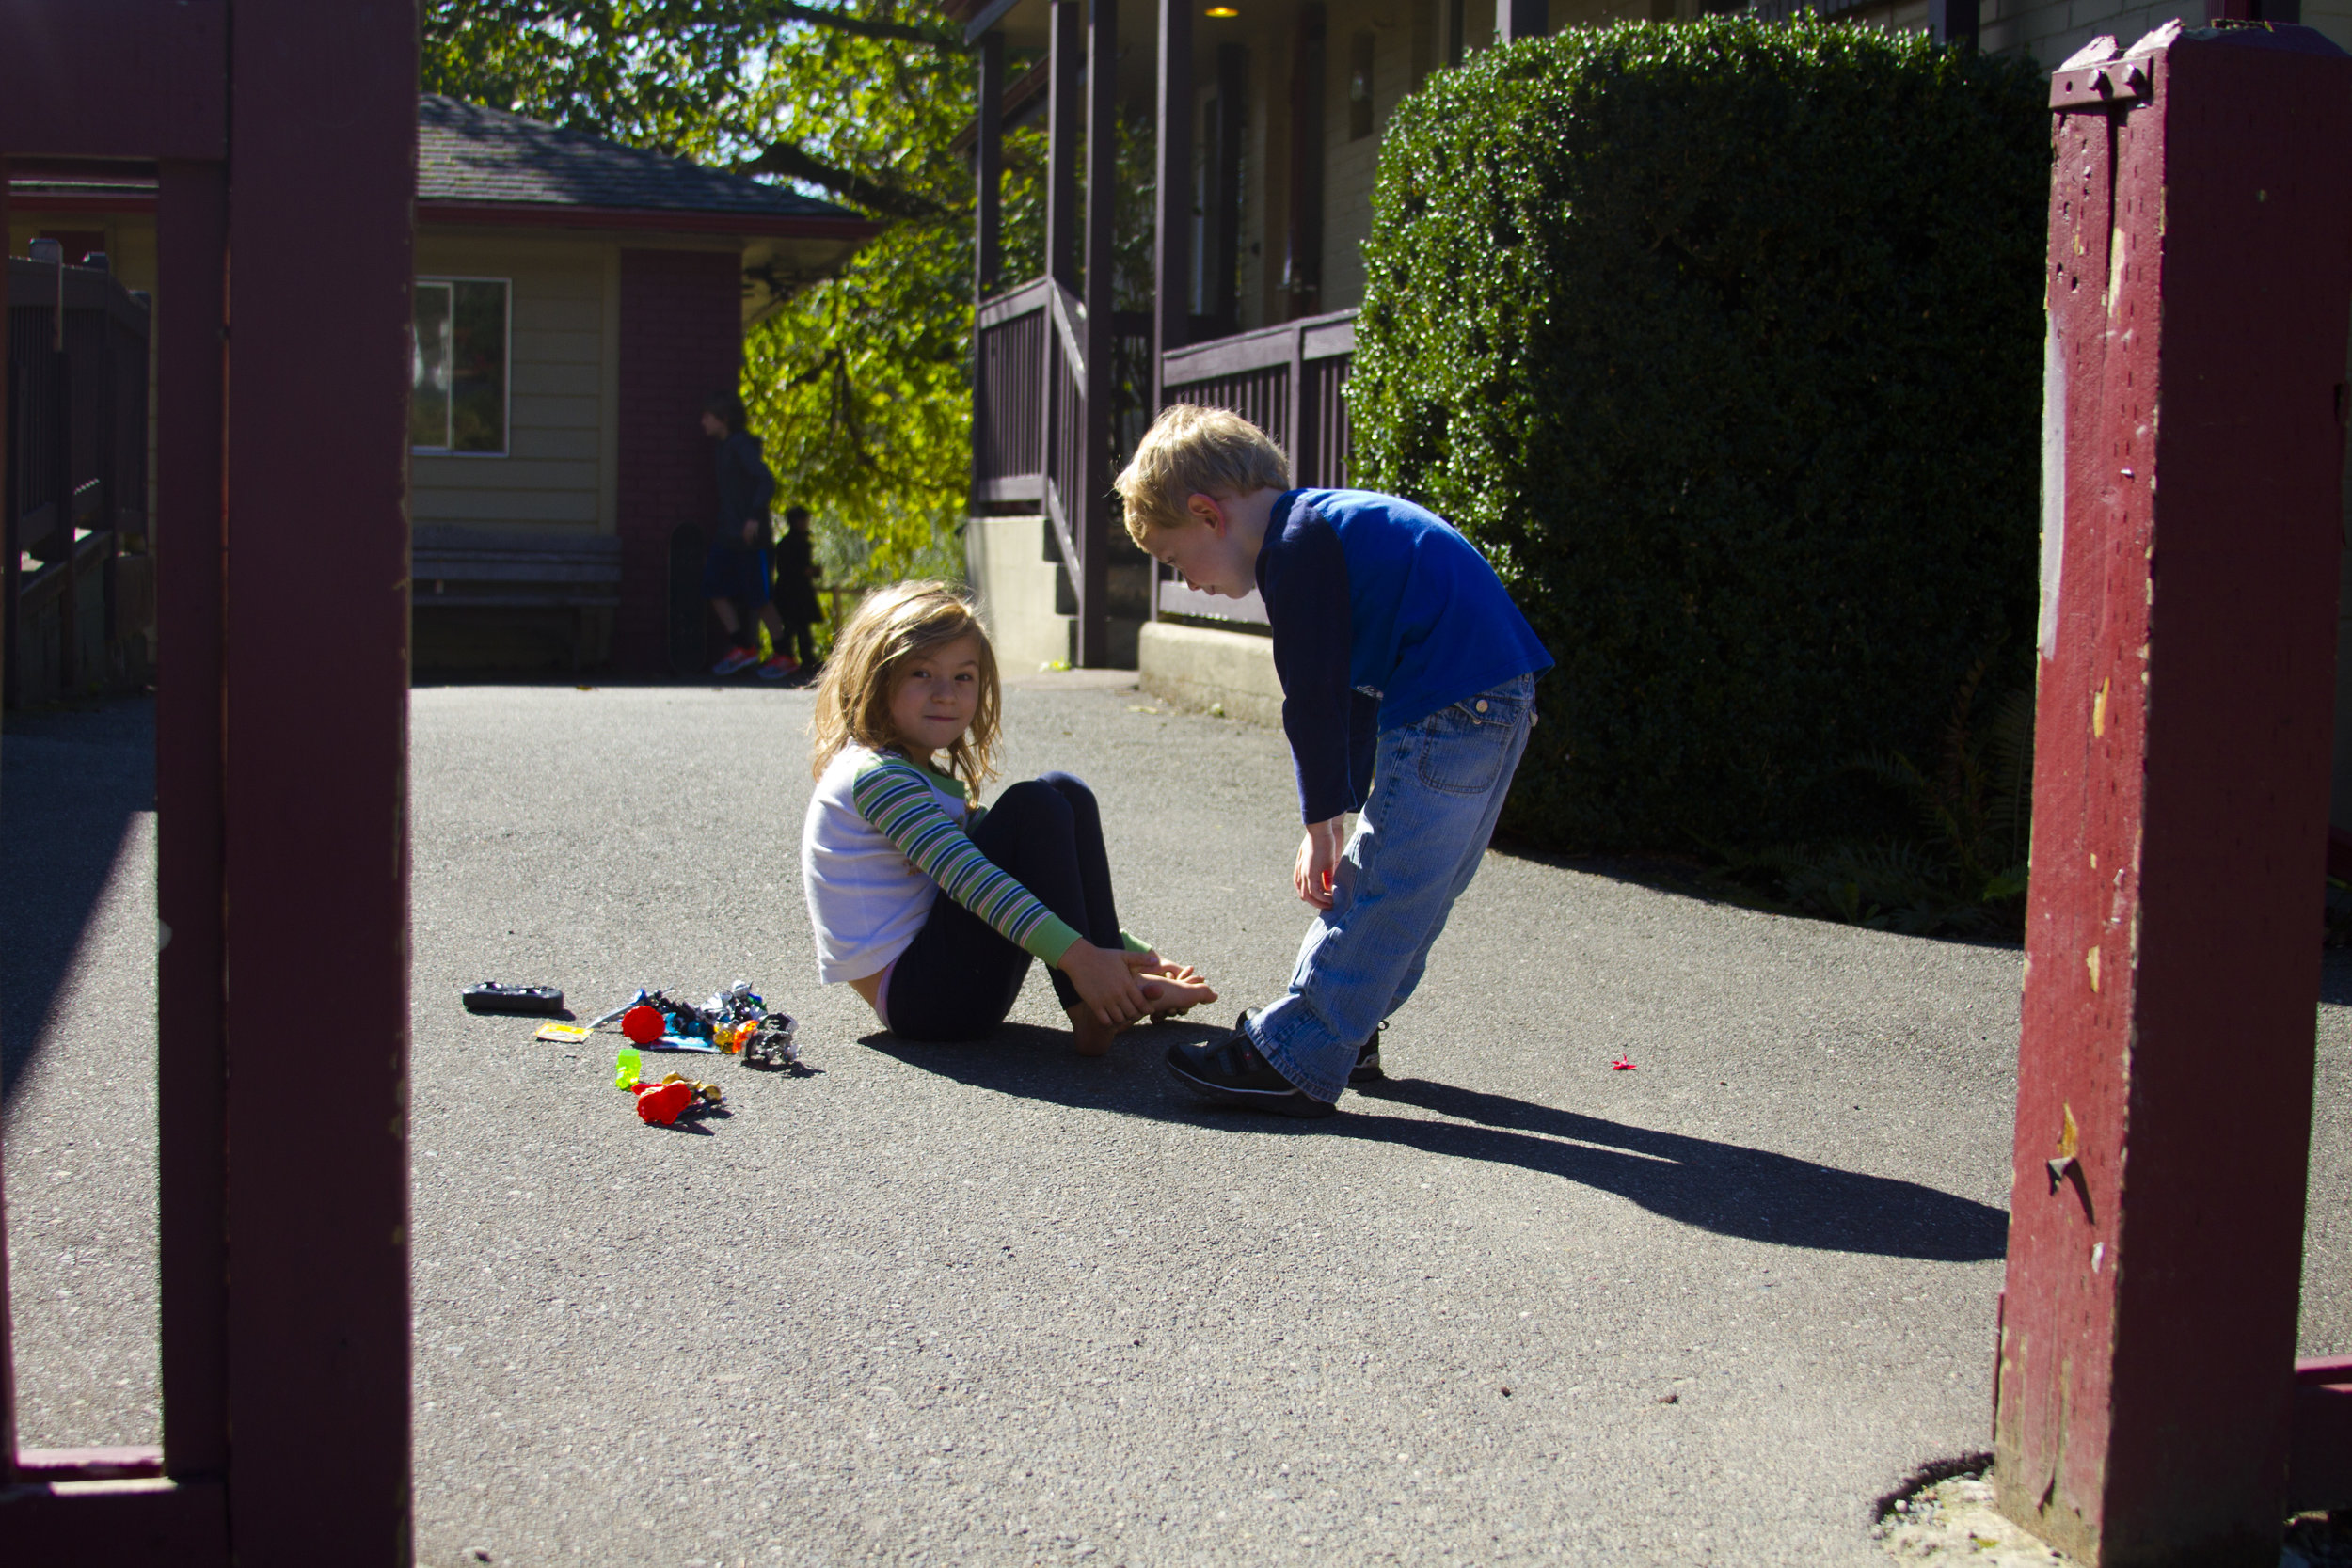 Two young students play with small toys outside.